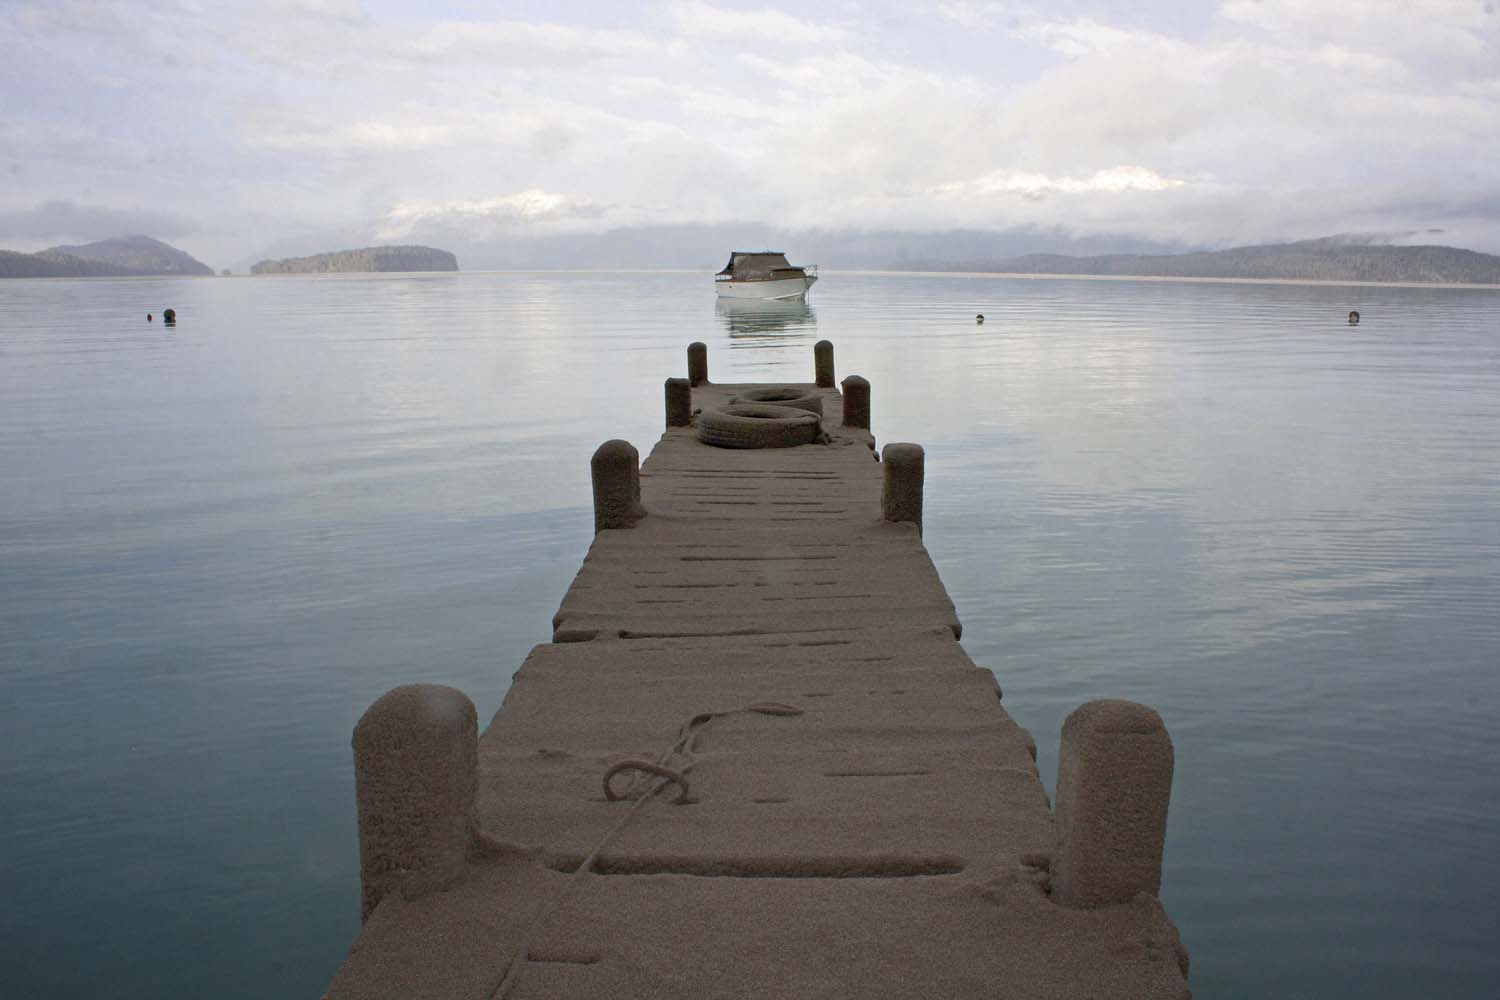 The pier of Puerto Arauco at Nahuel Huapi Lake is seen covered by sand and volcanic ash from the Chilean Puyehue-Cordon Caulle volcano in Villa La Angostura, southern Argentina, Friday, June 17, 2011.  The volcano started erupting on June 4 after remaining dormant for decades.